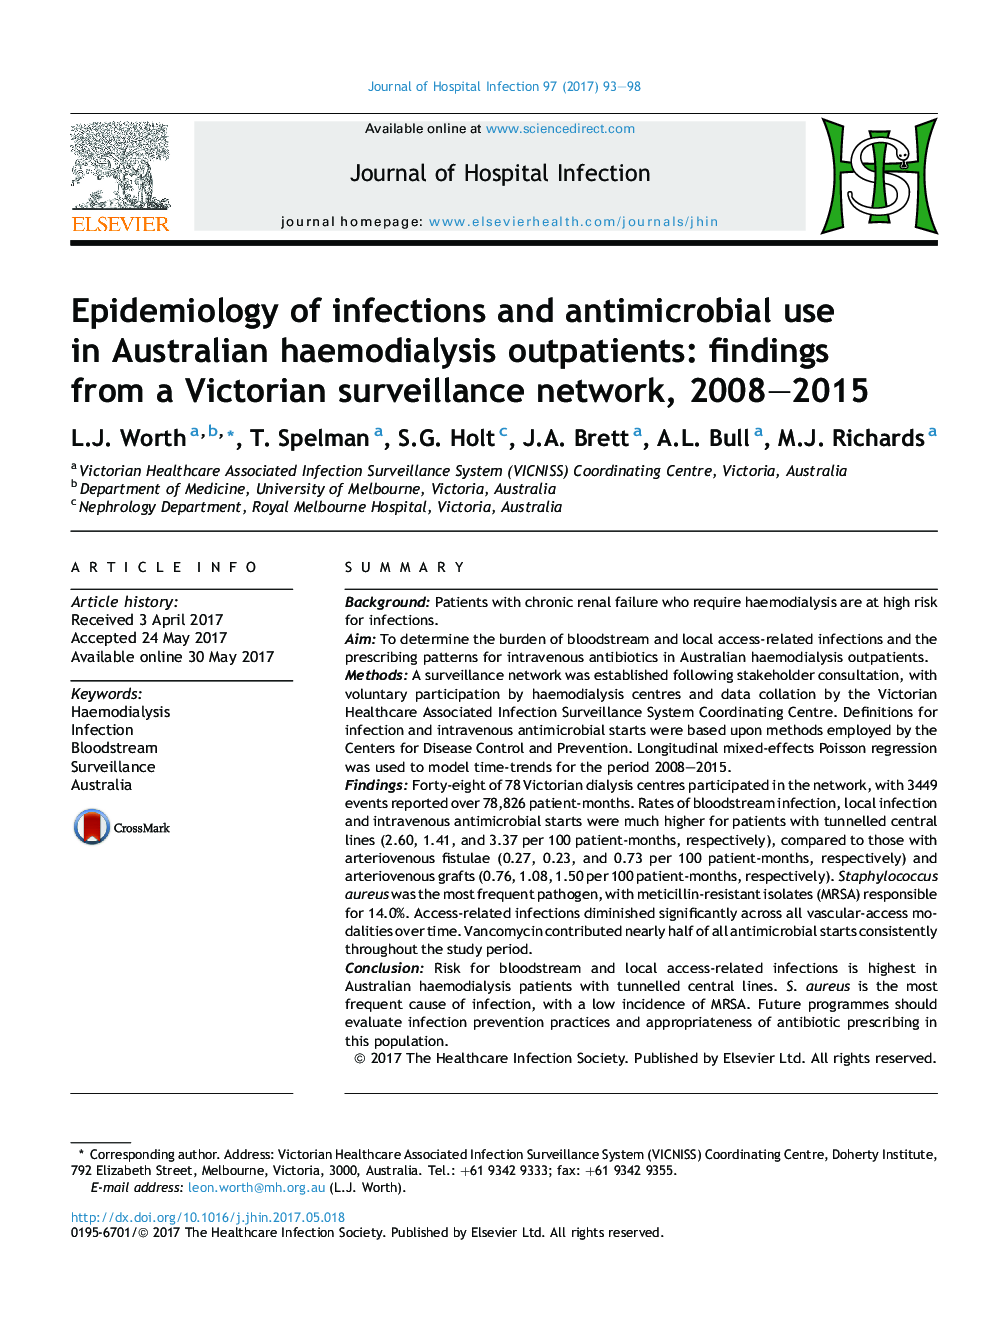 Epidemiology of infections and antimicrobial use in Australian haemodialysis outpatients: findings from a Victorian surveillance network, 2008-2015